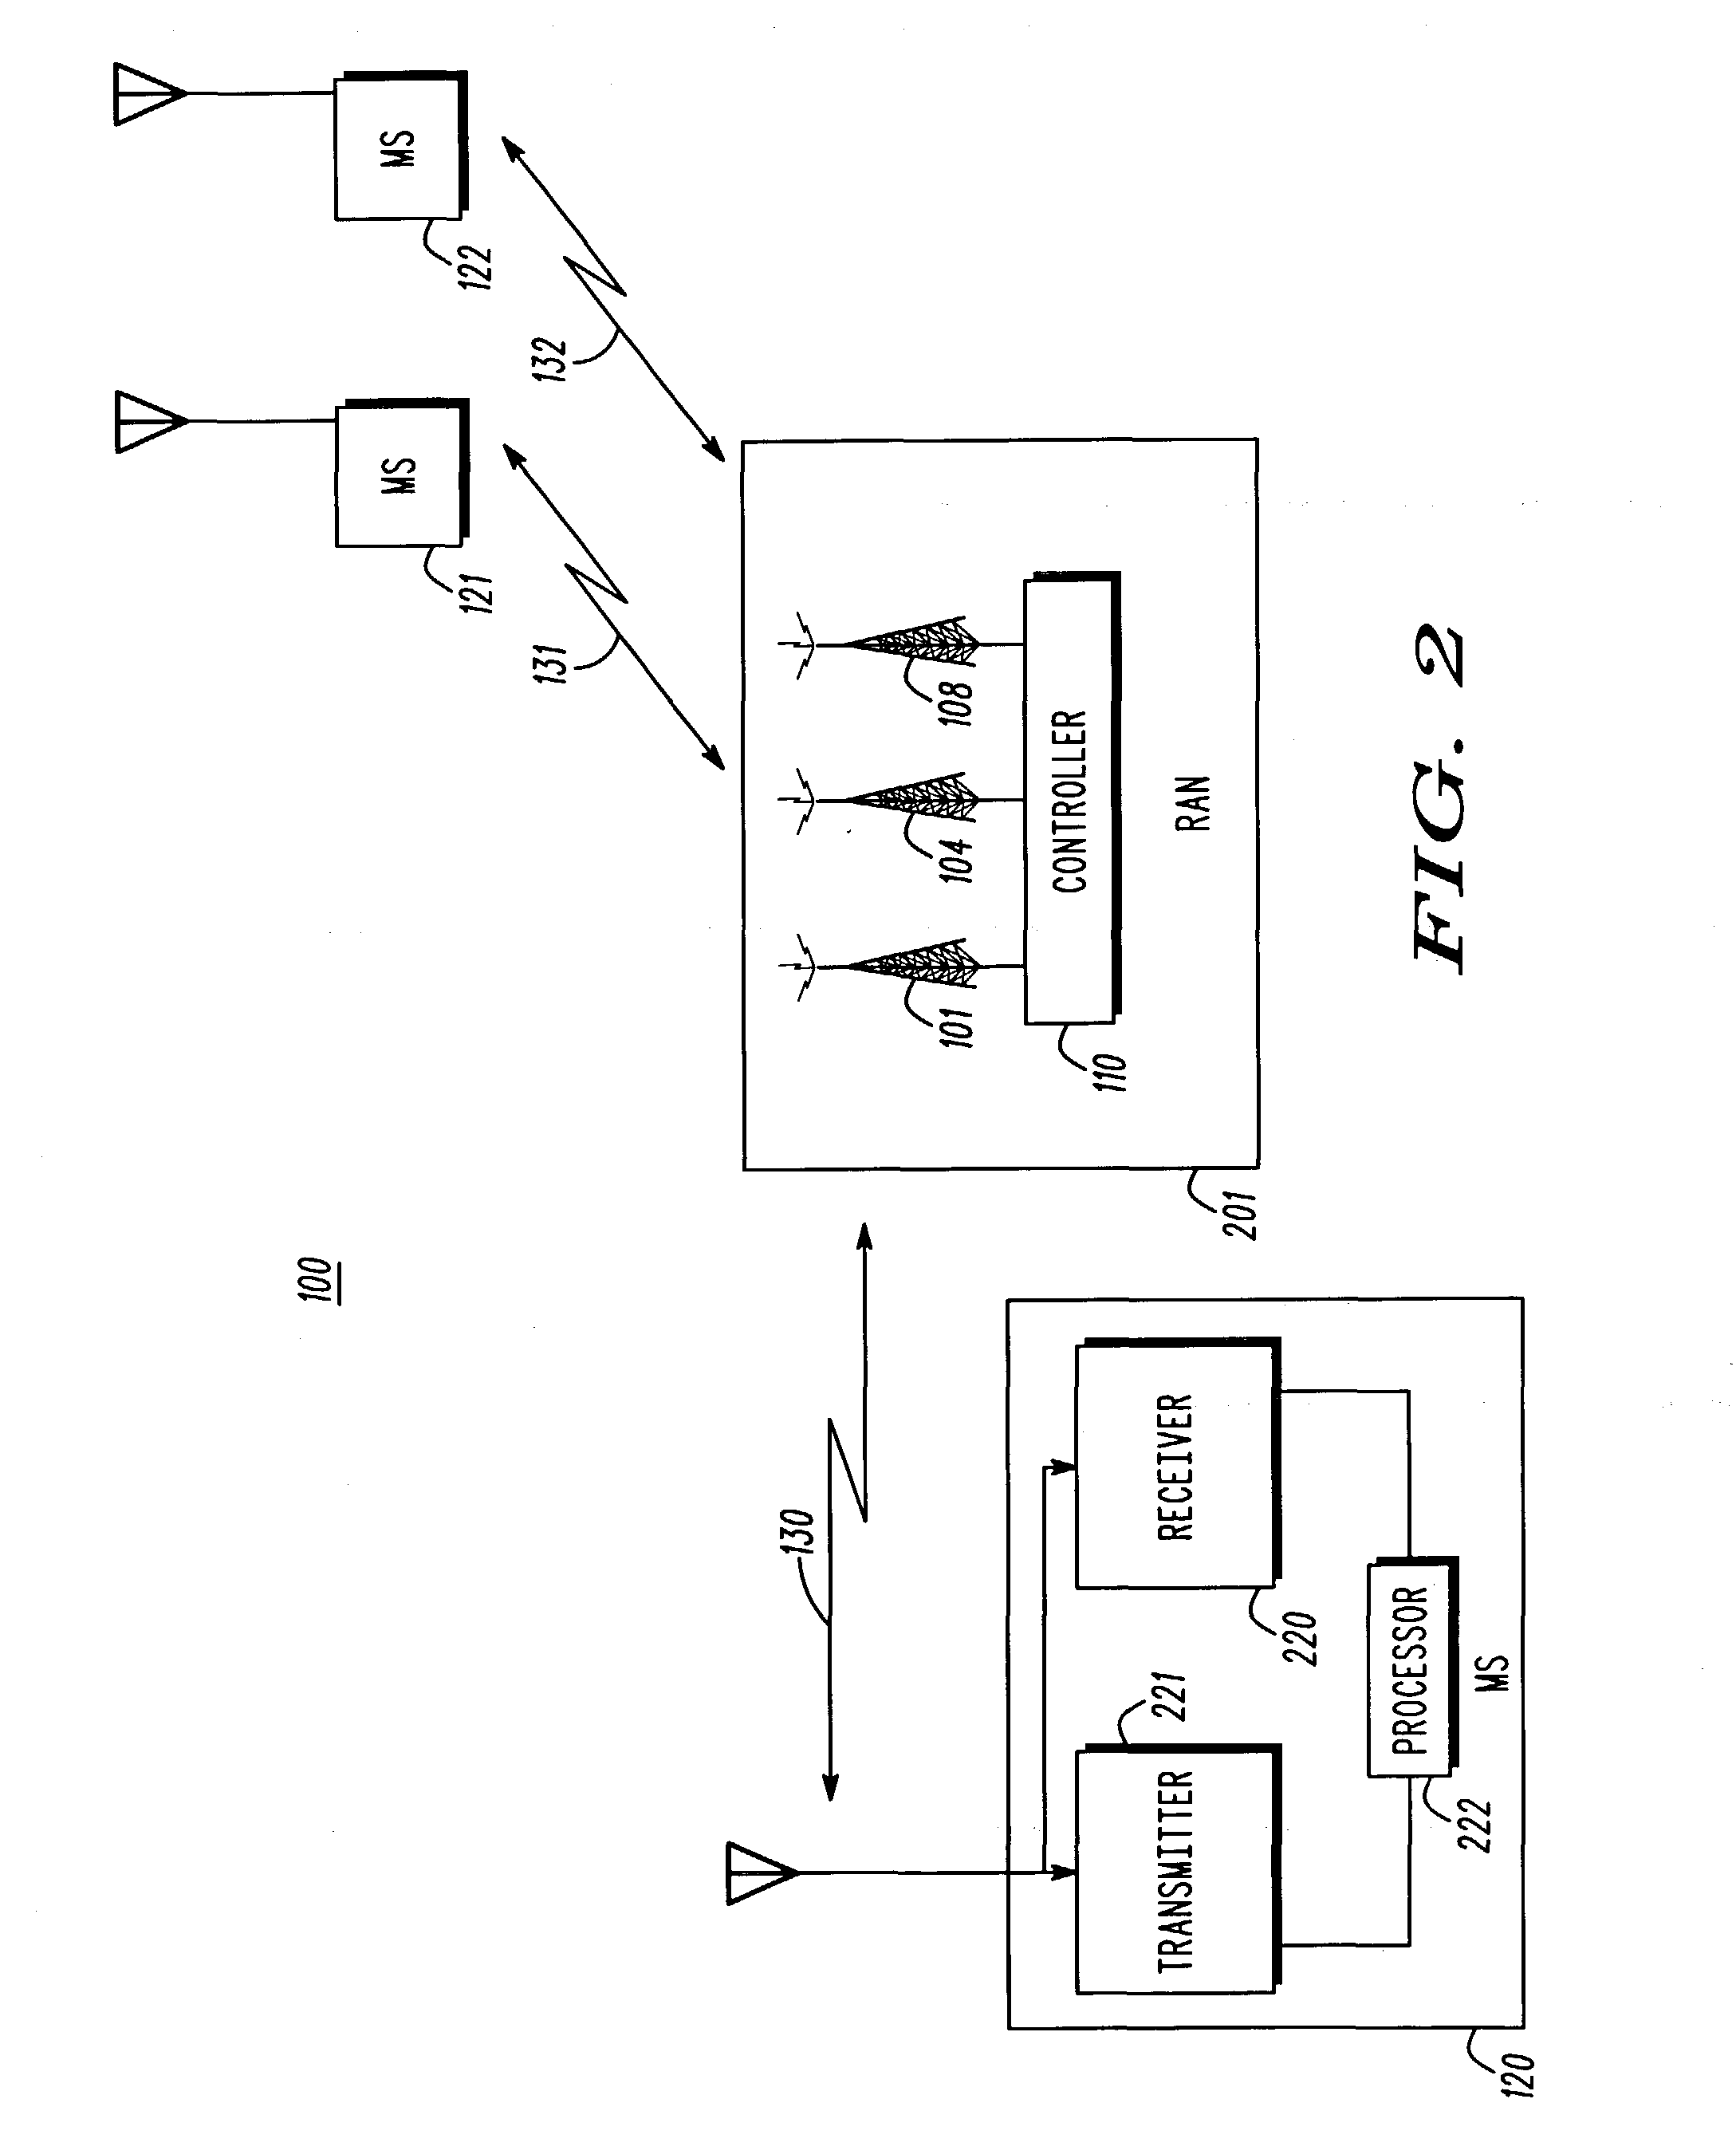 Method and apparatus for reducing paging-related delays